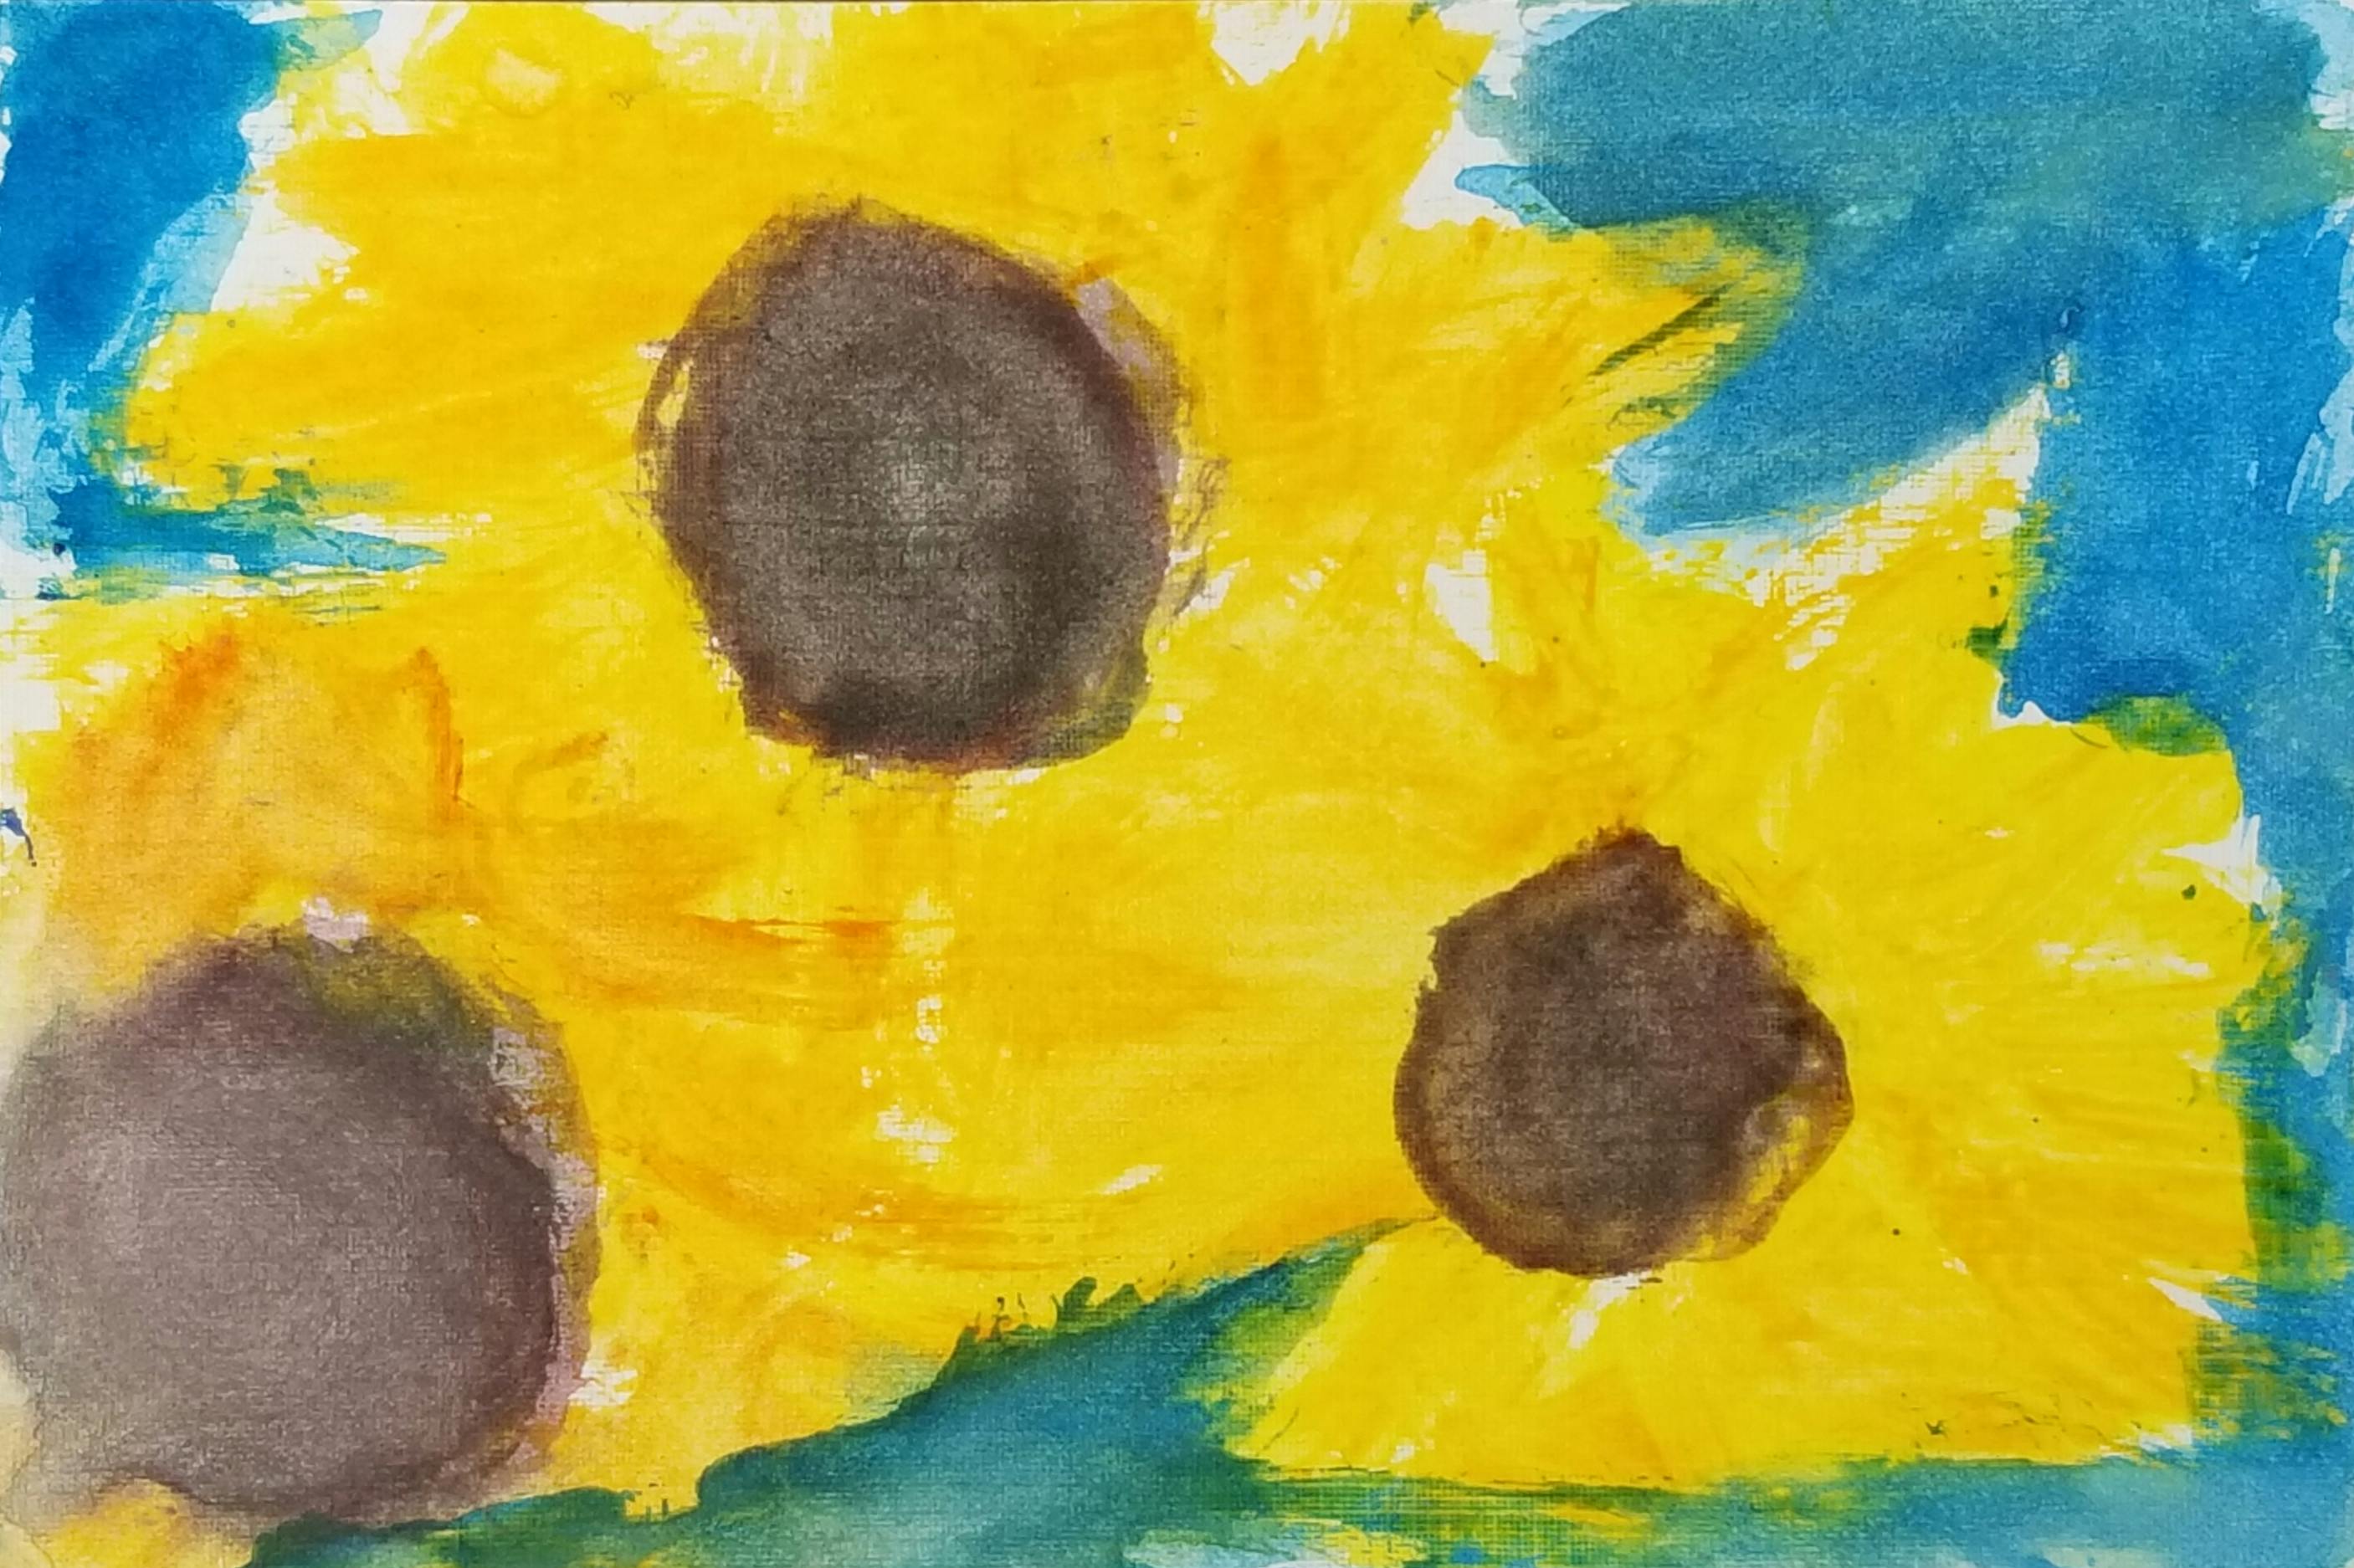 Free stock photo of sunflower, watercolor painting